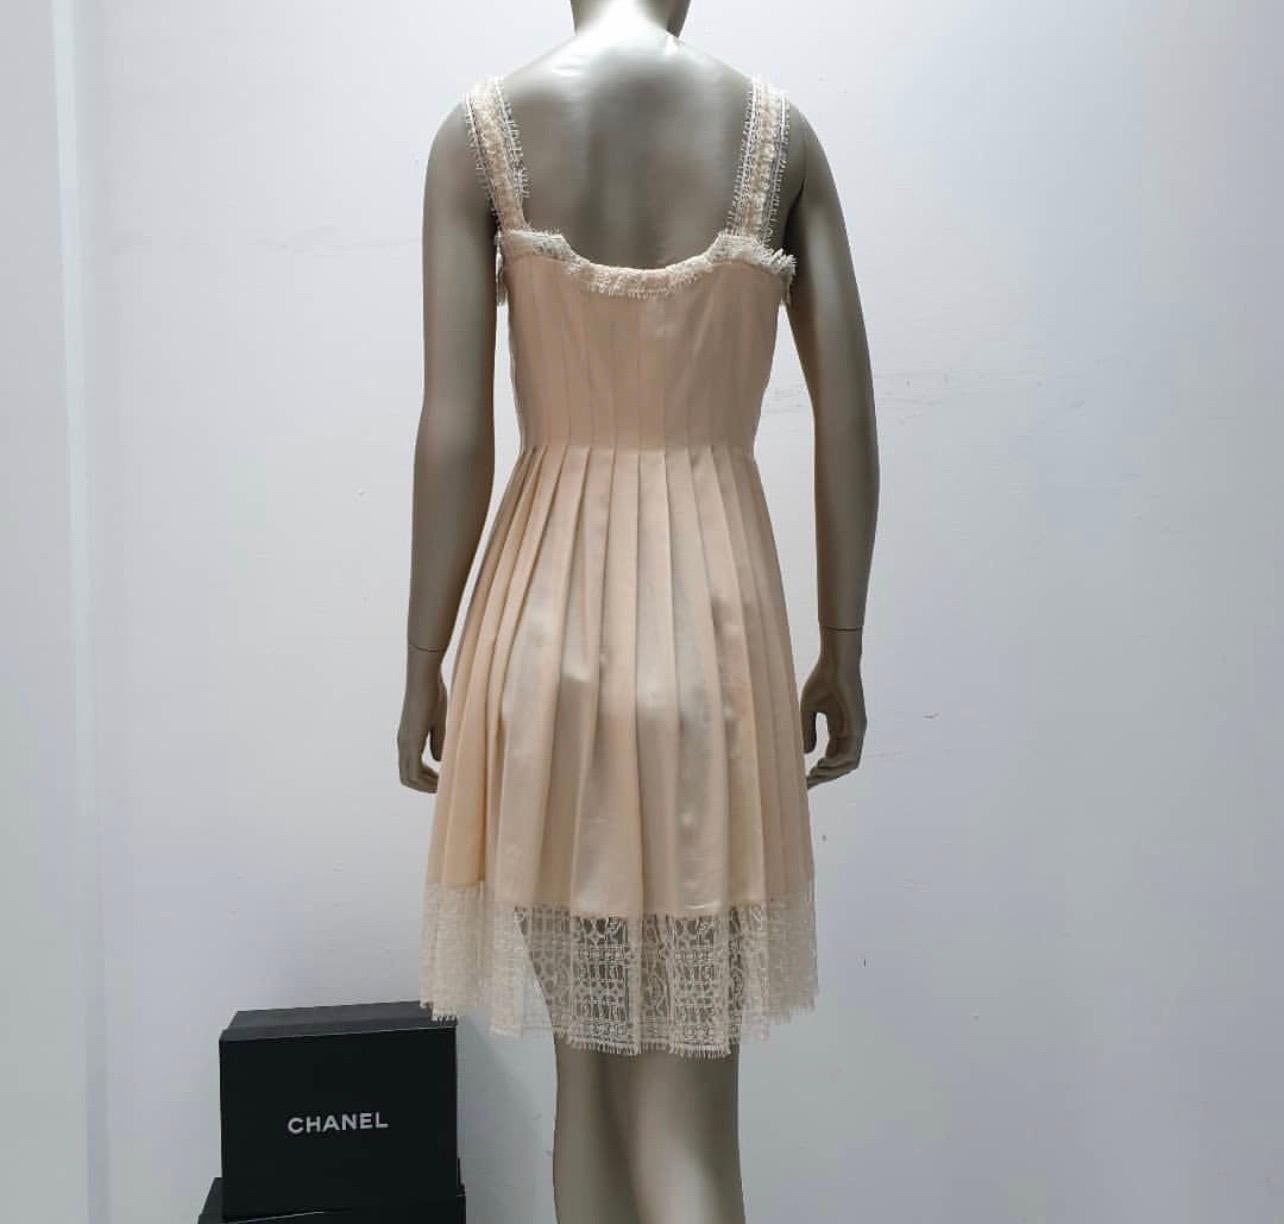 Chanel Pre-Fall 2013
Chanel pleated dress with lace and straps.
Sz.38fr, 
100%silk
Salmon pink color. W
Very good condition.
Front opening with four enamel jewelry buttons. 
Unlined and wrap skirt. 
Very beautiful lace details and hidden transparent